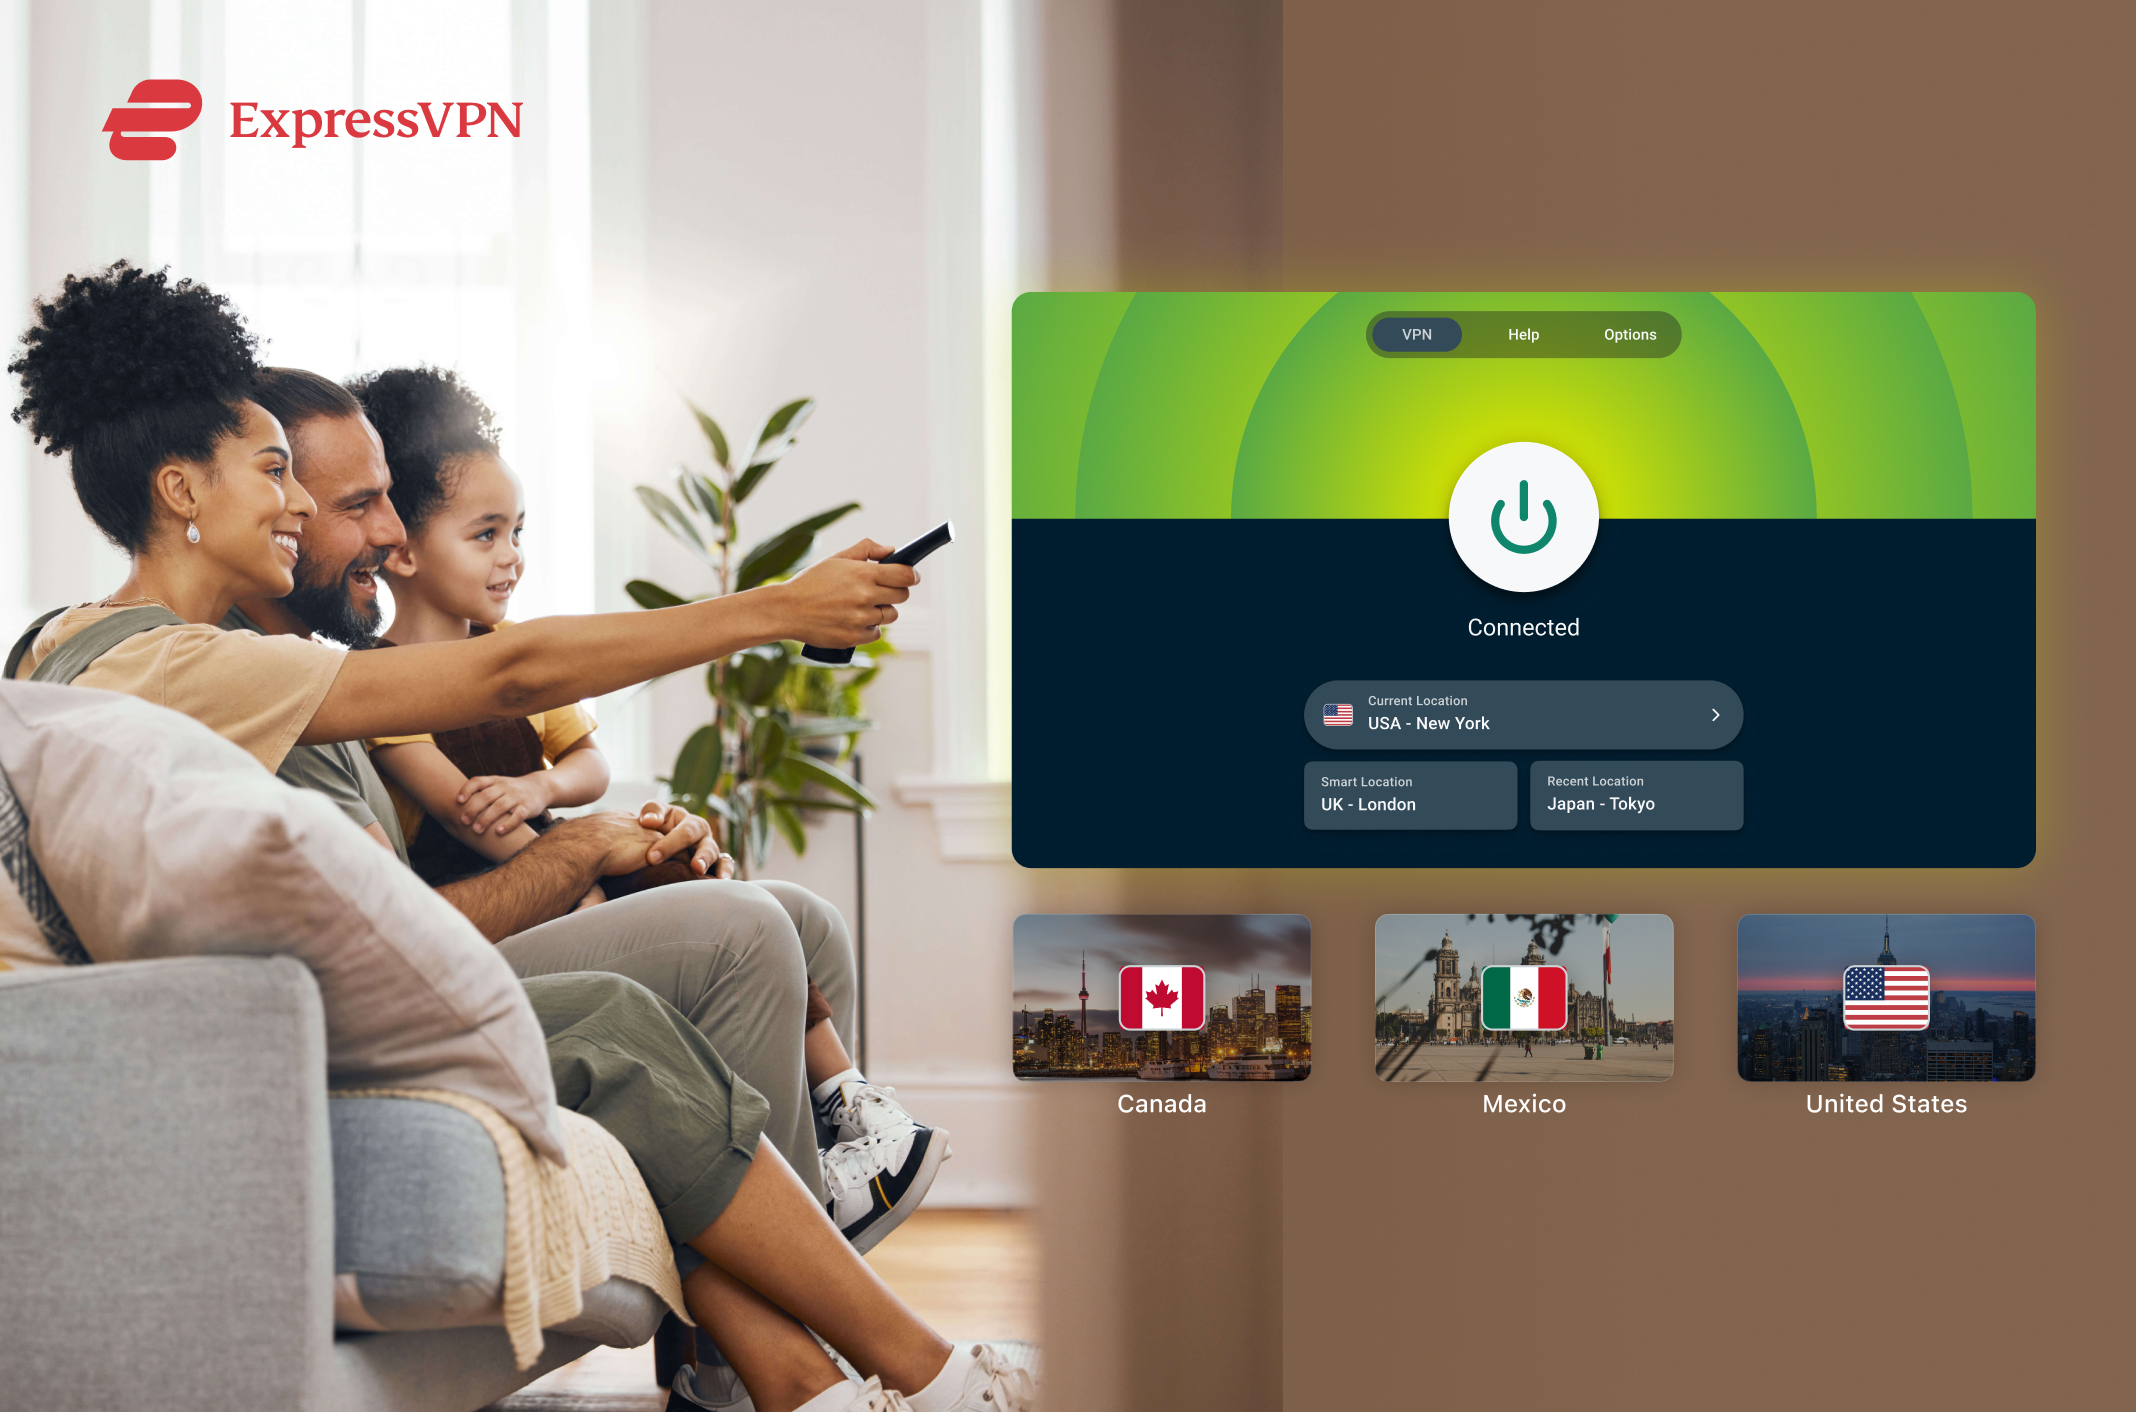 Android TV app lifestyle image.